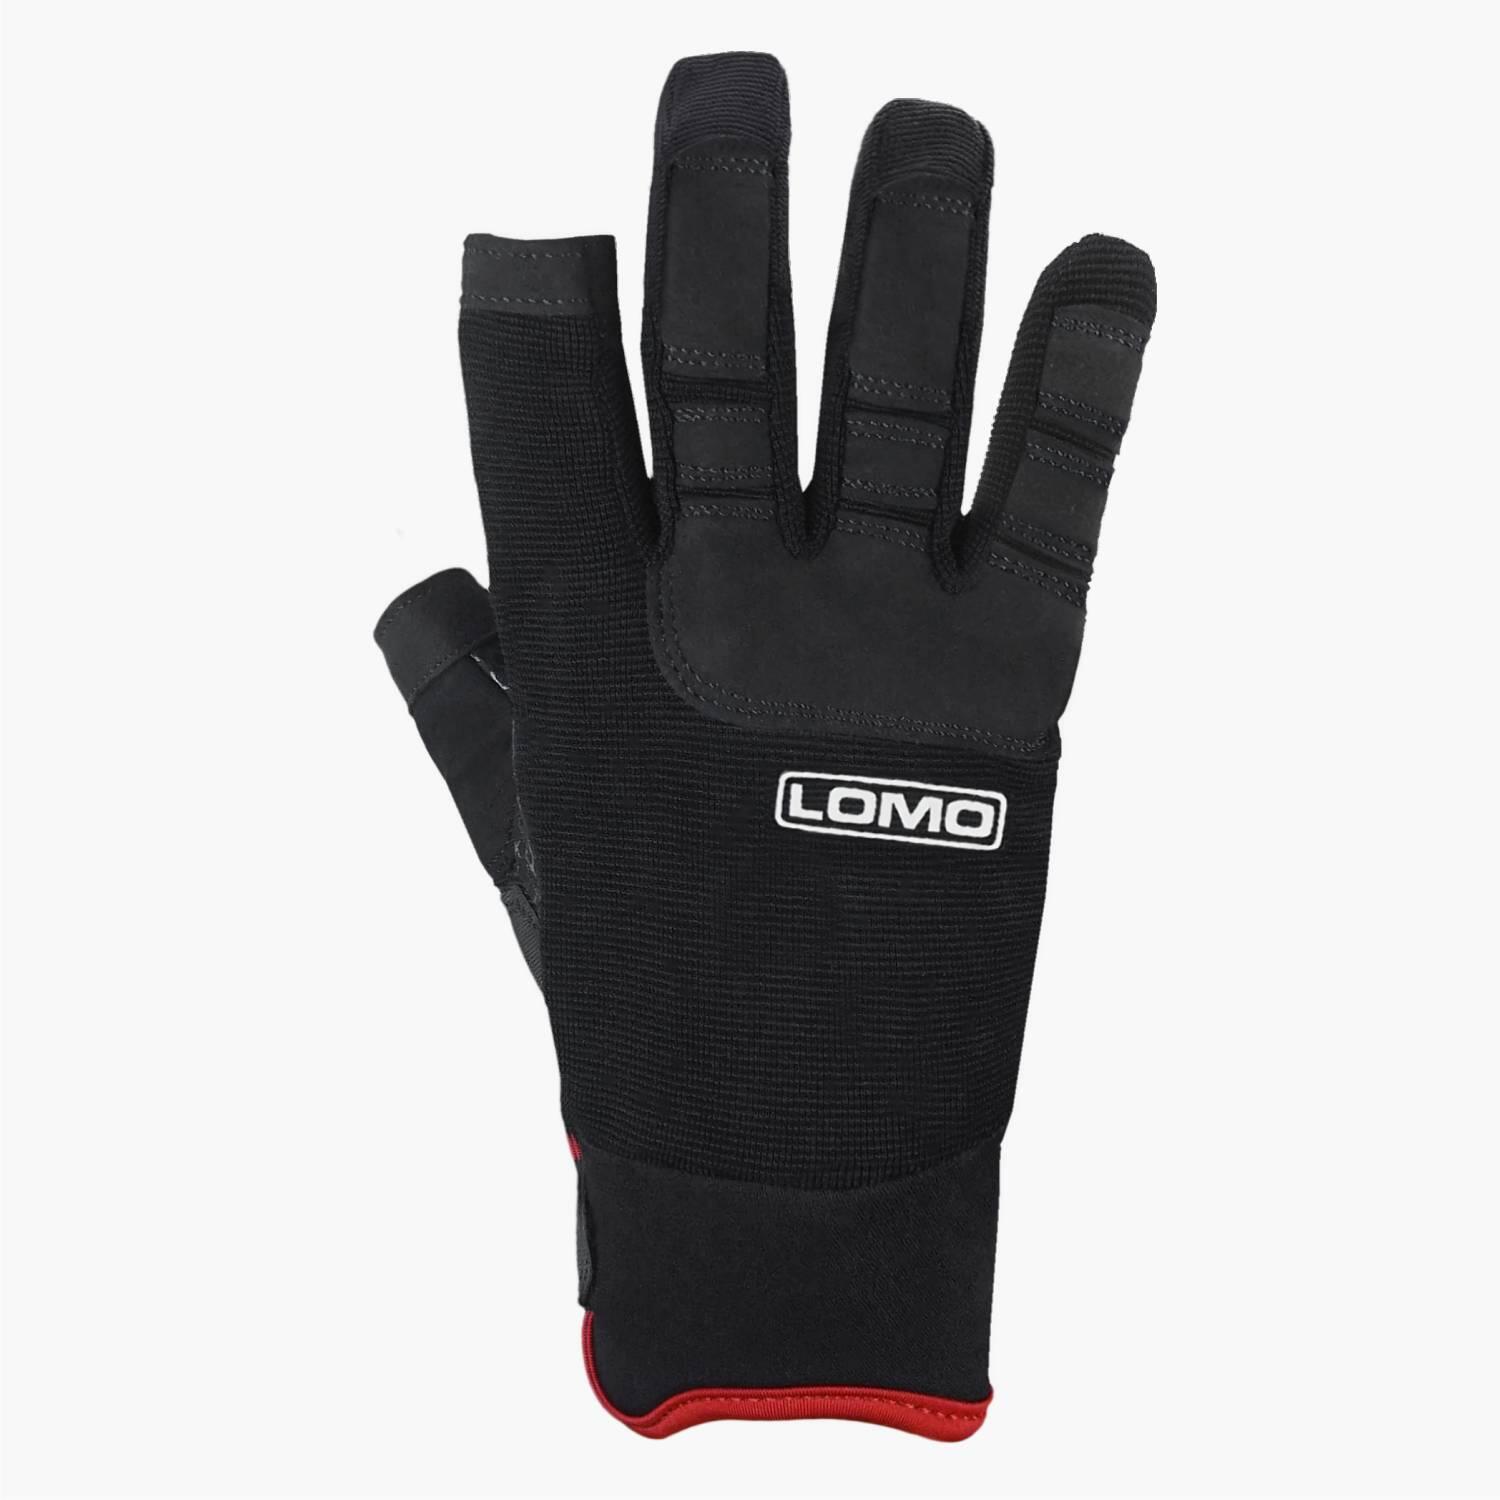 Sailing Pro-S Gloves - SIT (Short Index finger and Thumb) 2/7